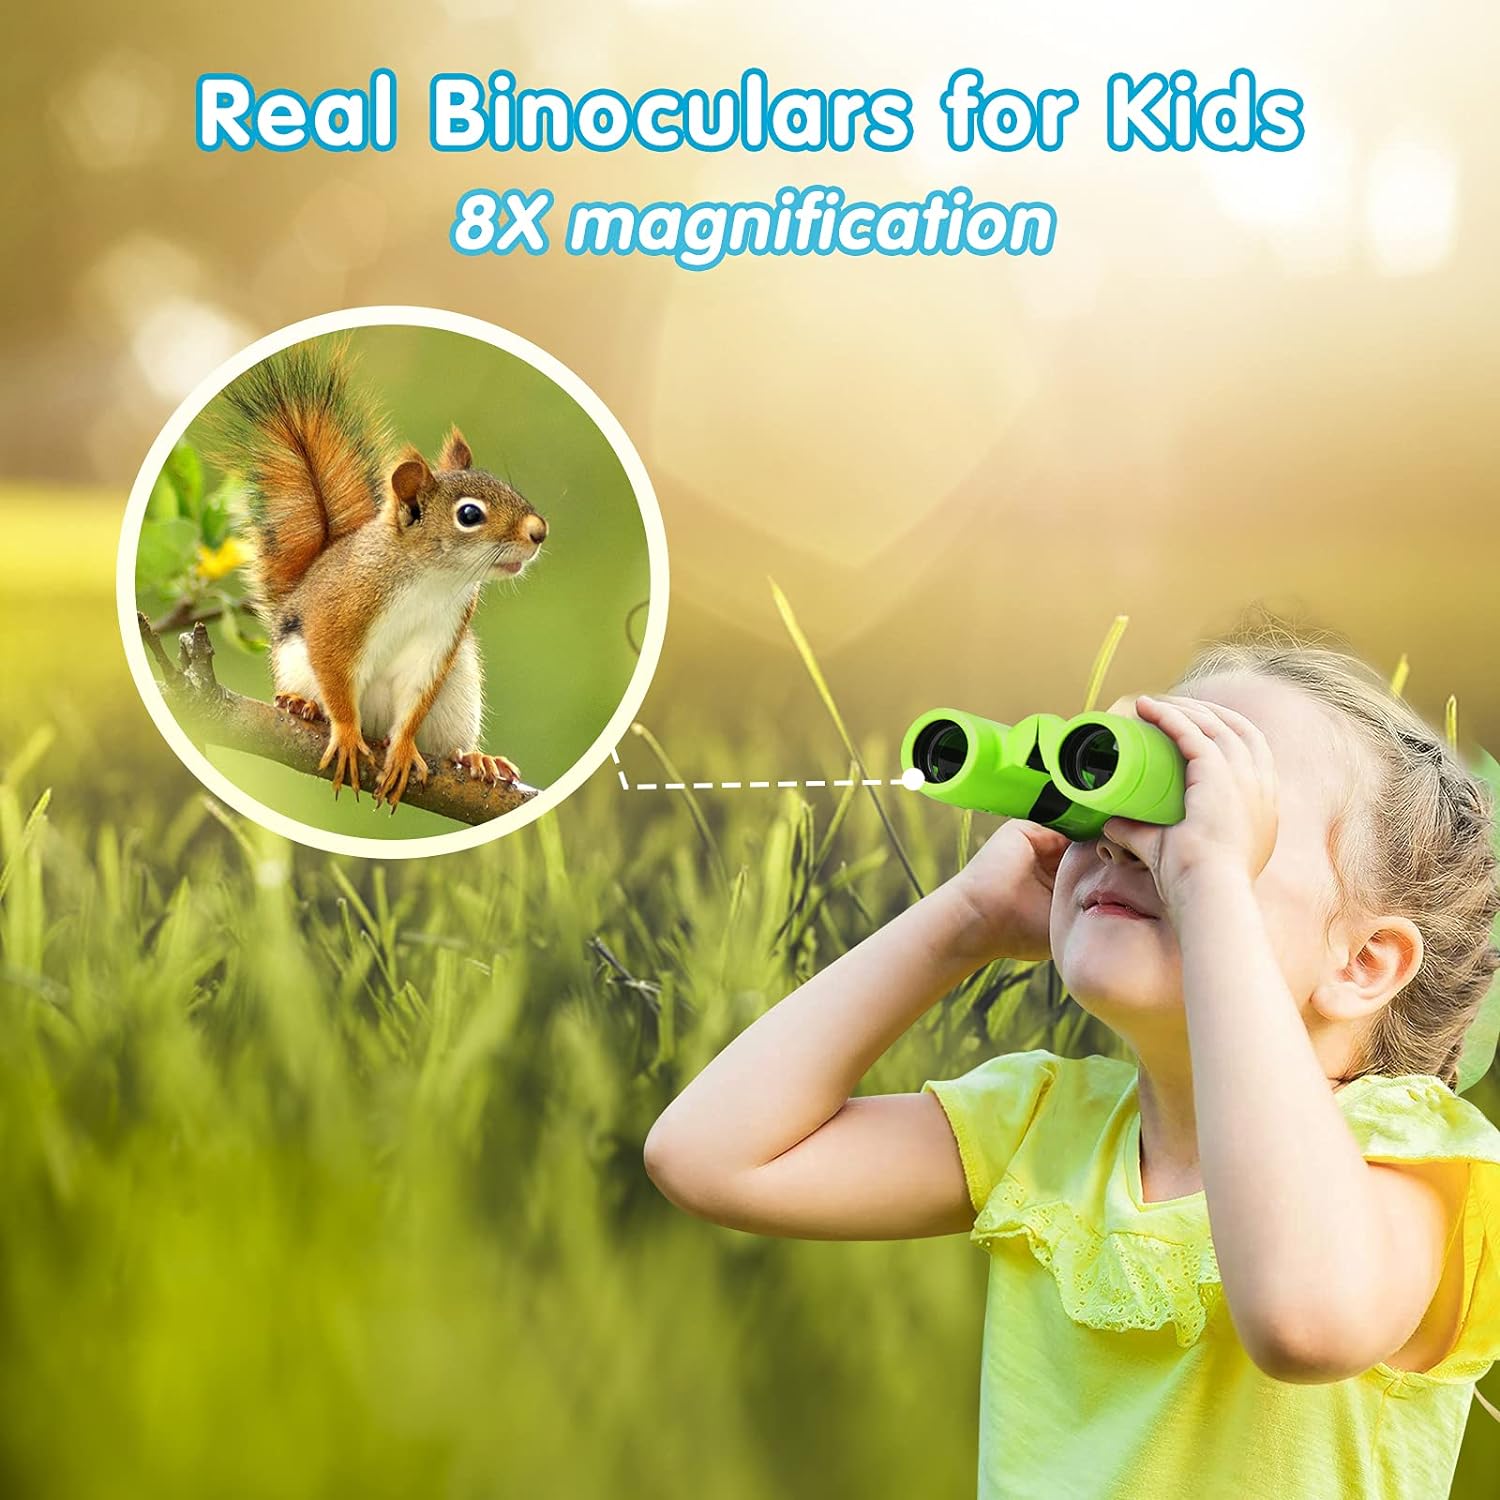 Binoculars for Kids, Gifts for 3-12 Year Boys Girls, Compact Kids Binoculars 8x21 High-Resolution for Bird Watching, Camping, Exploration, Hiking, Hunting, Sports Events and Safari Park (Green)